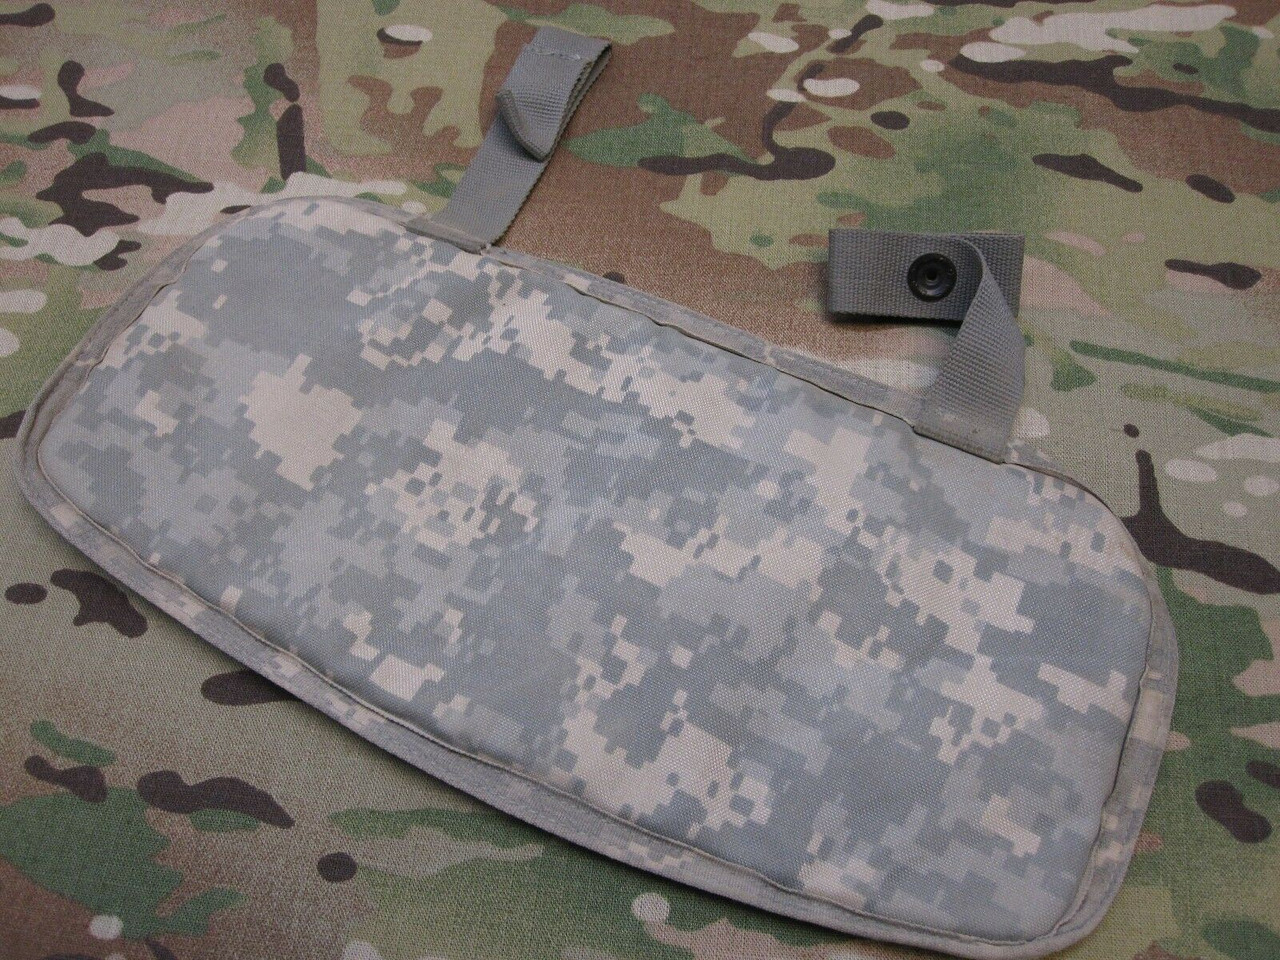 NEW ACU DIGITAL LOWER BACK PROTECTOR BUTT PAD ARMY UCP 8470-01-564-3393